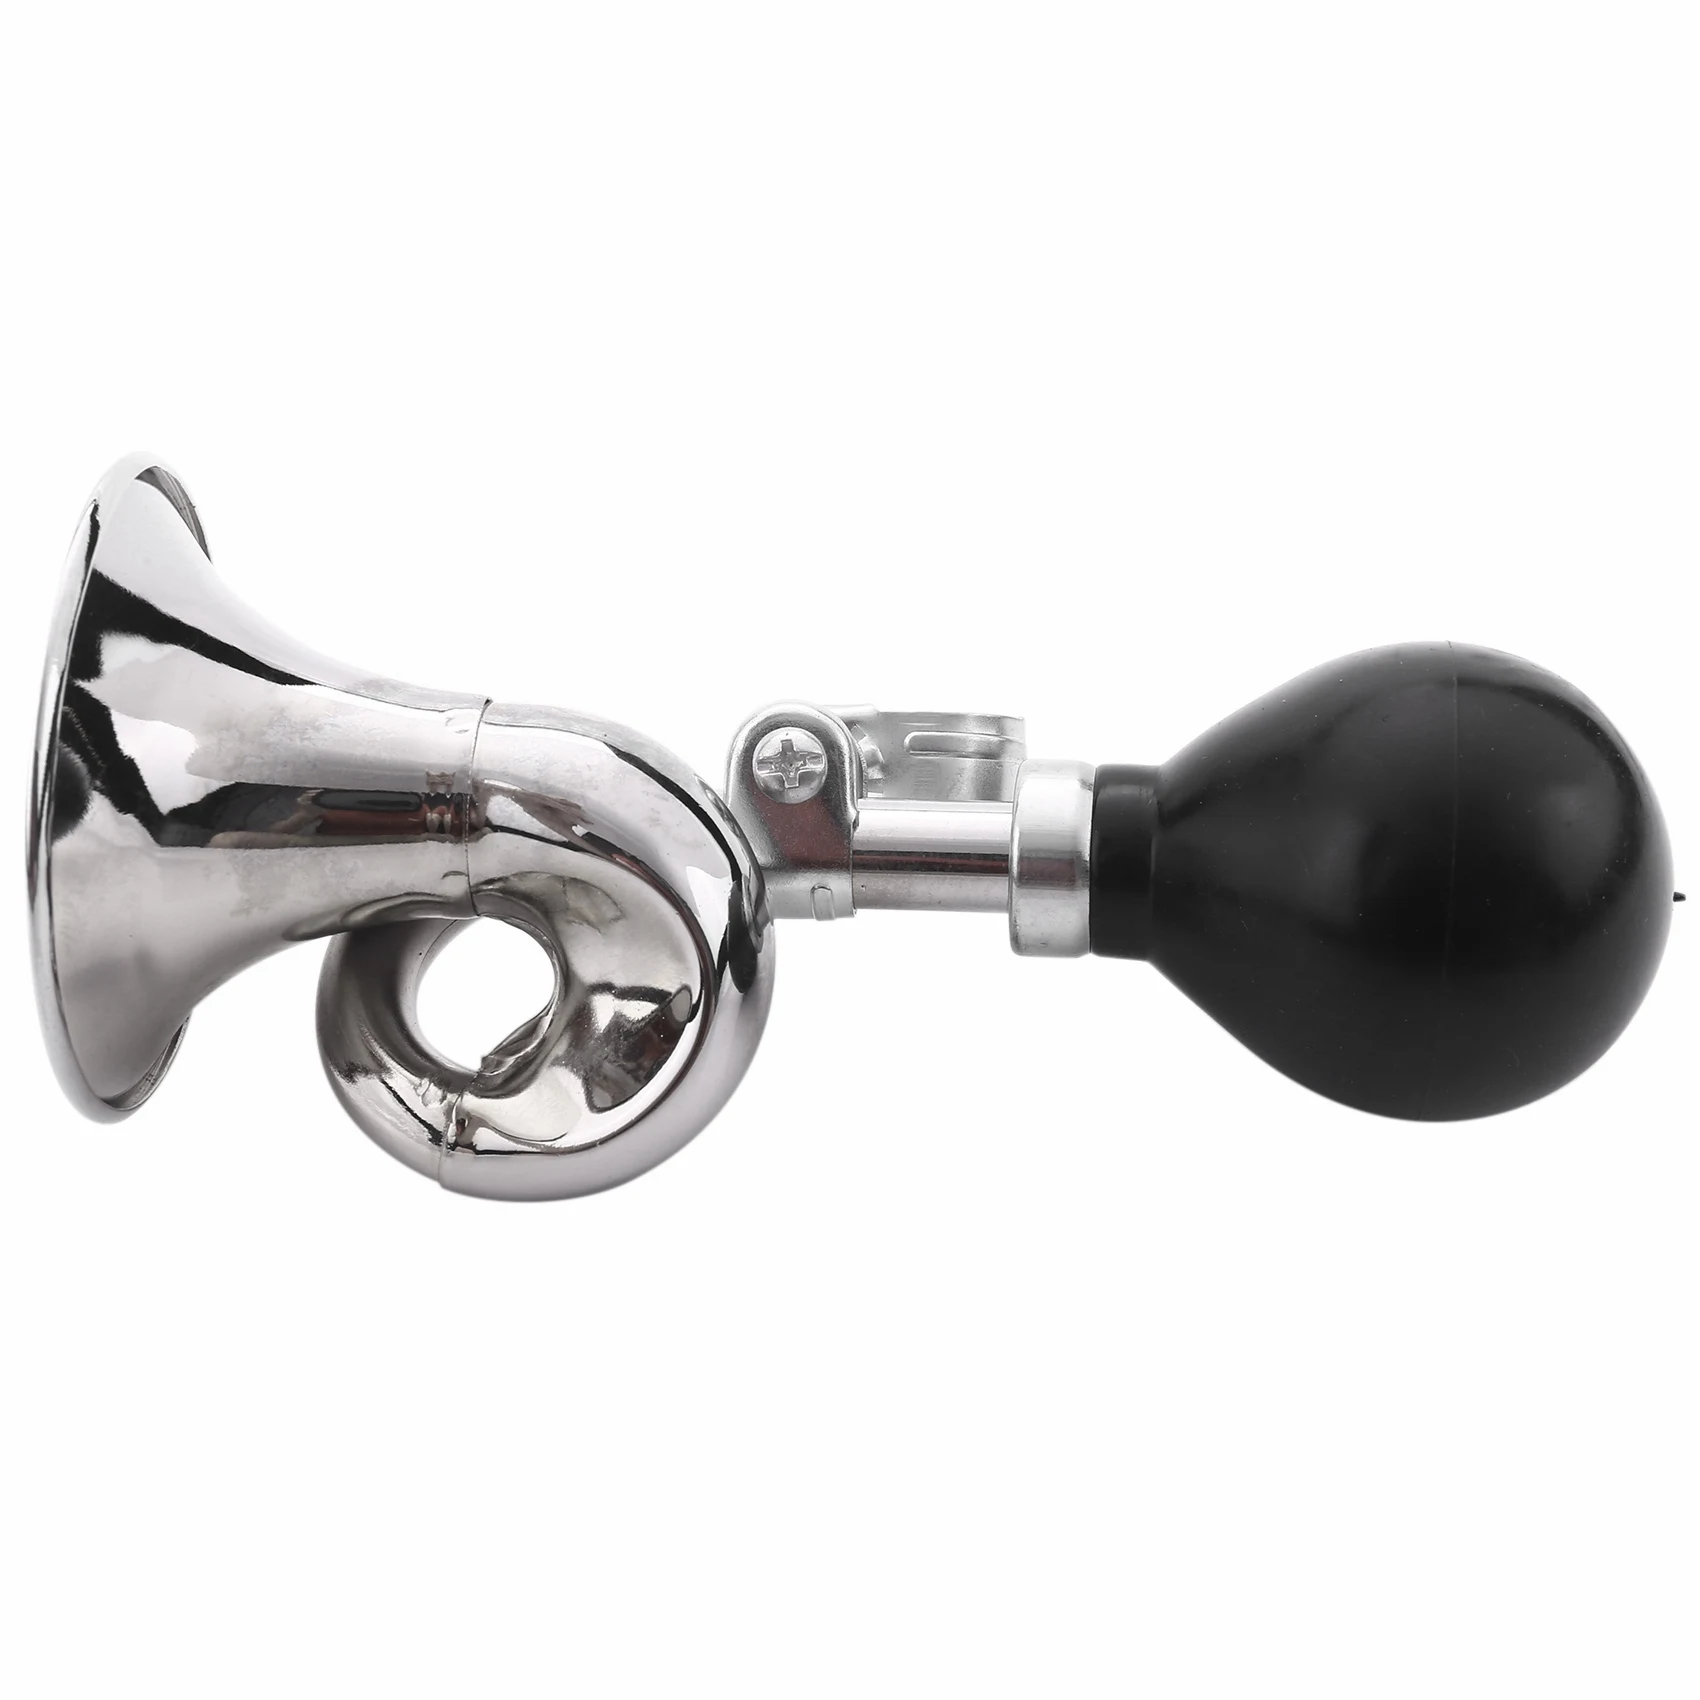 

Non-Electronic Trumpet Loud Bicycle Cycle Bike Bell Vintage Retro Bugle Hooter Horn